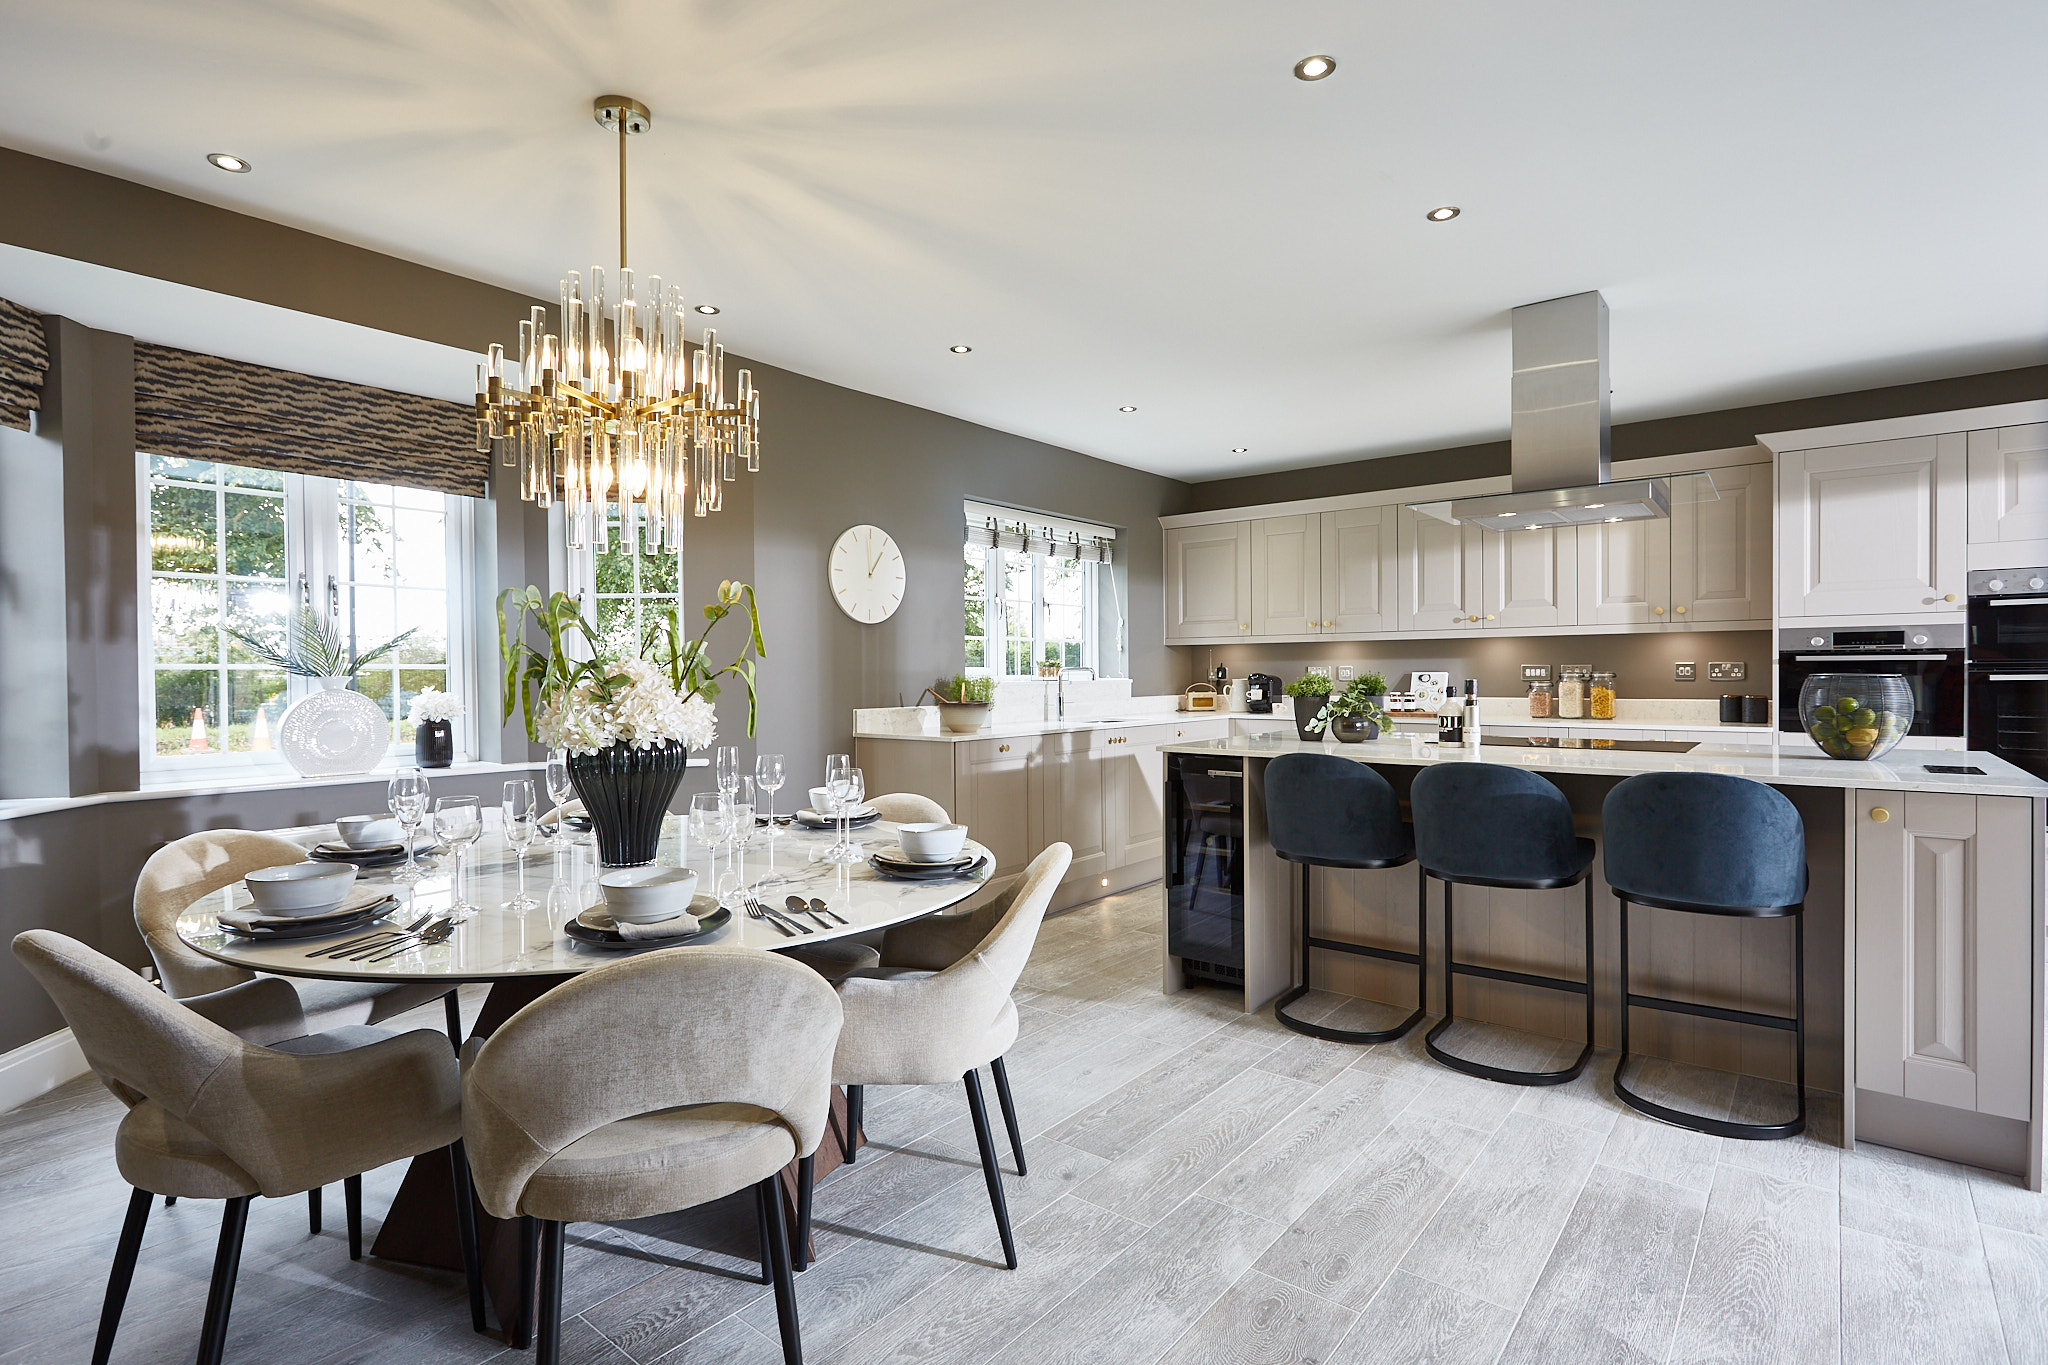 Stonebridge Homes team up with Show Business Interiors